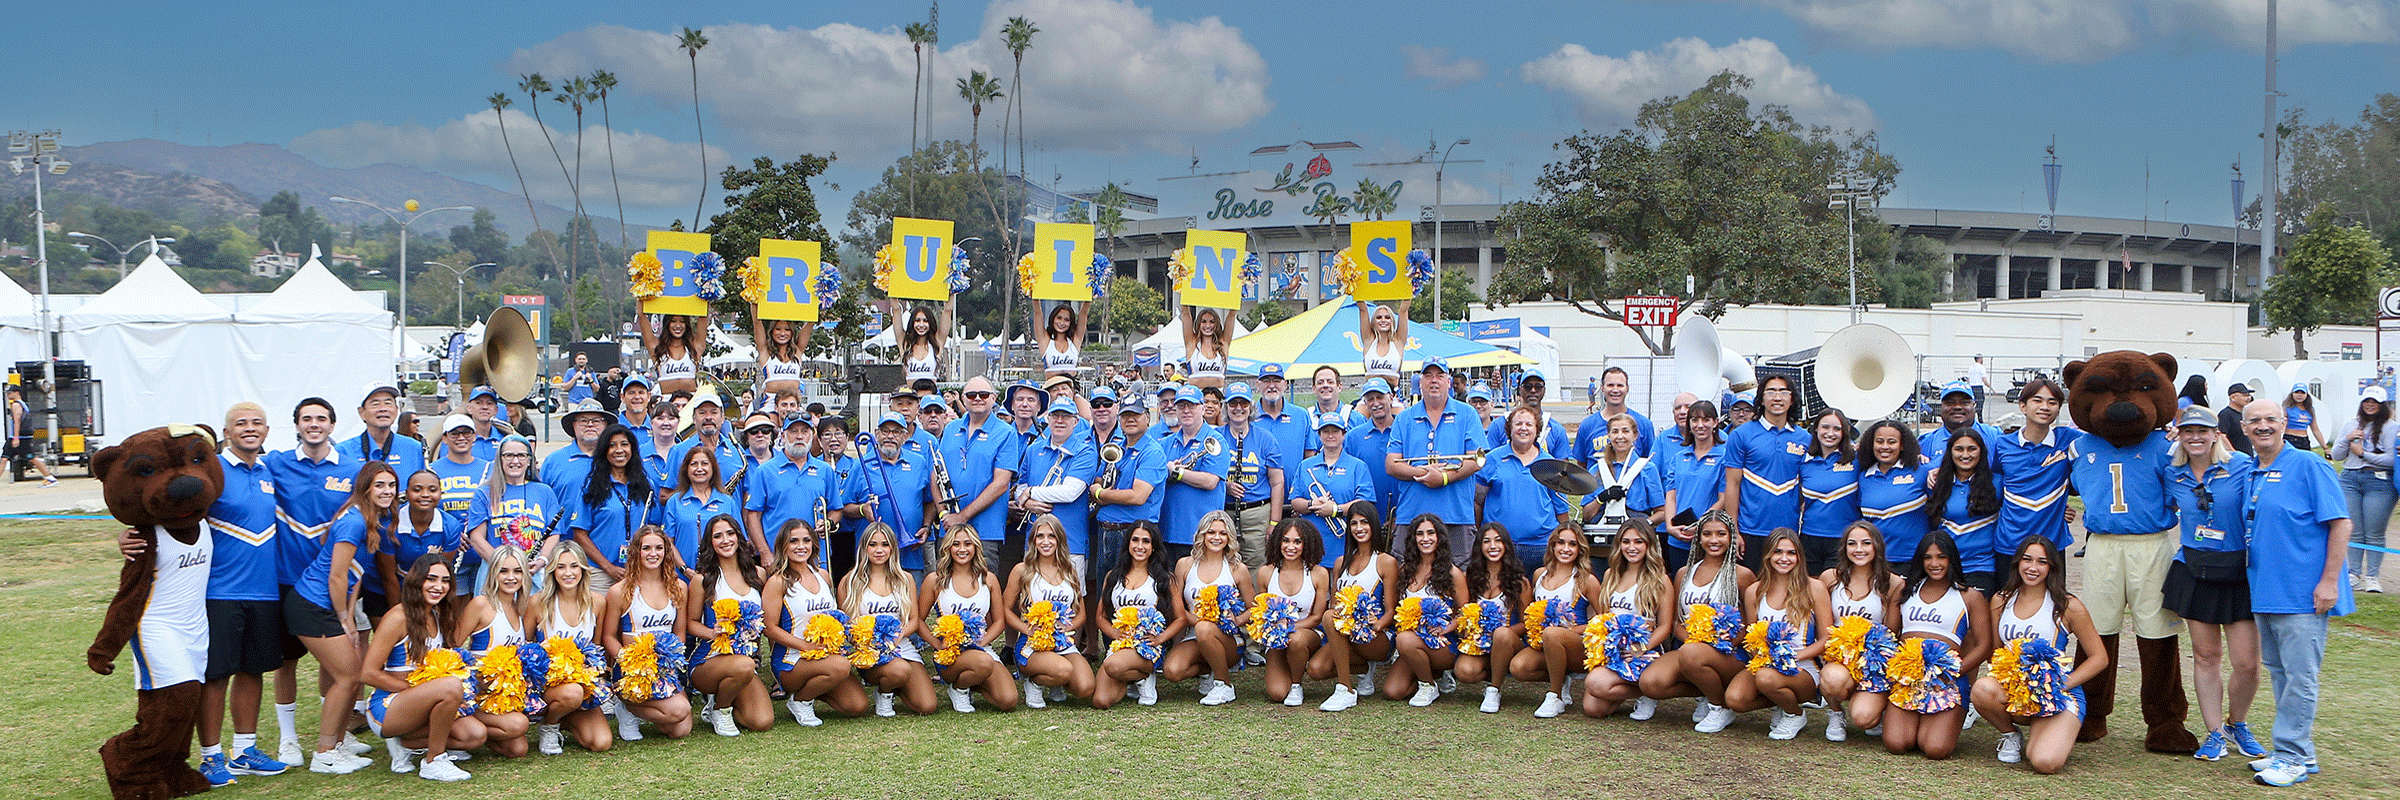 UCLA Alumni Band with spirit squad standing in front of the Rose Bowl